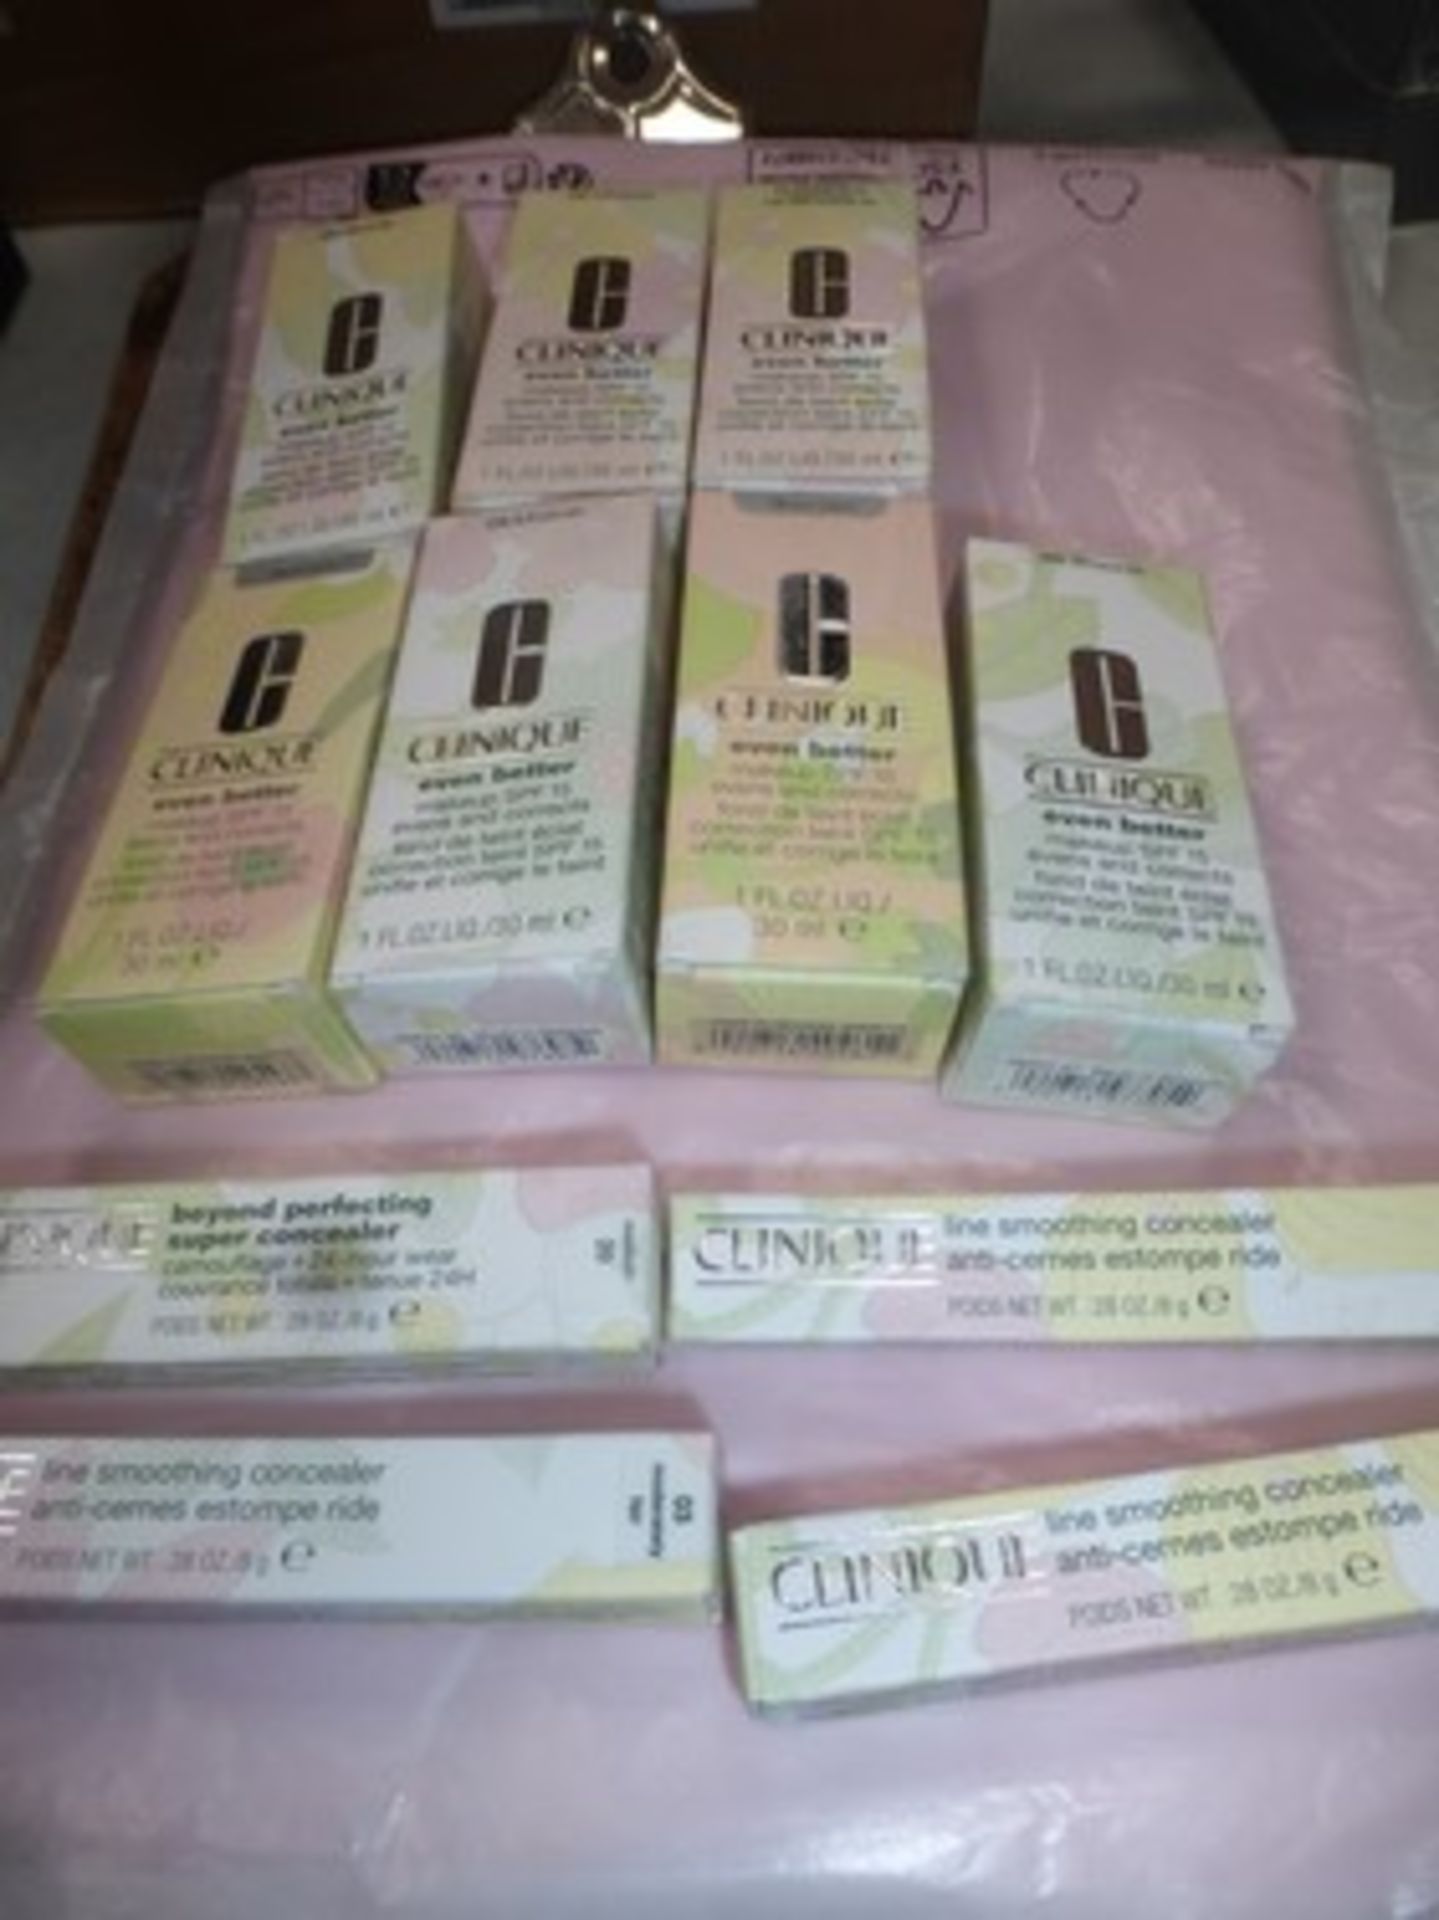 7 x 30ml bottles of Clinique even better foundation products, various shades and 4 x 8g Clinique